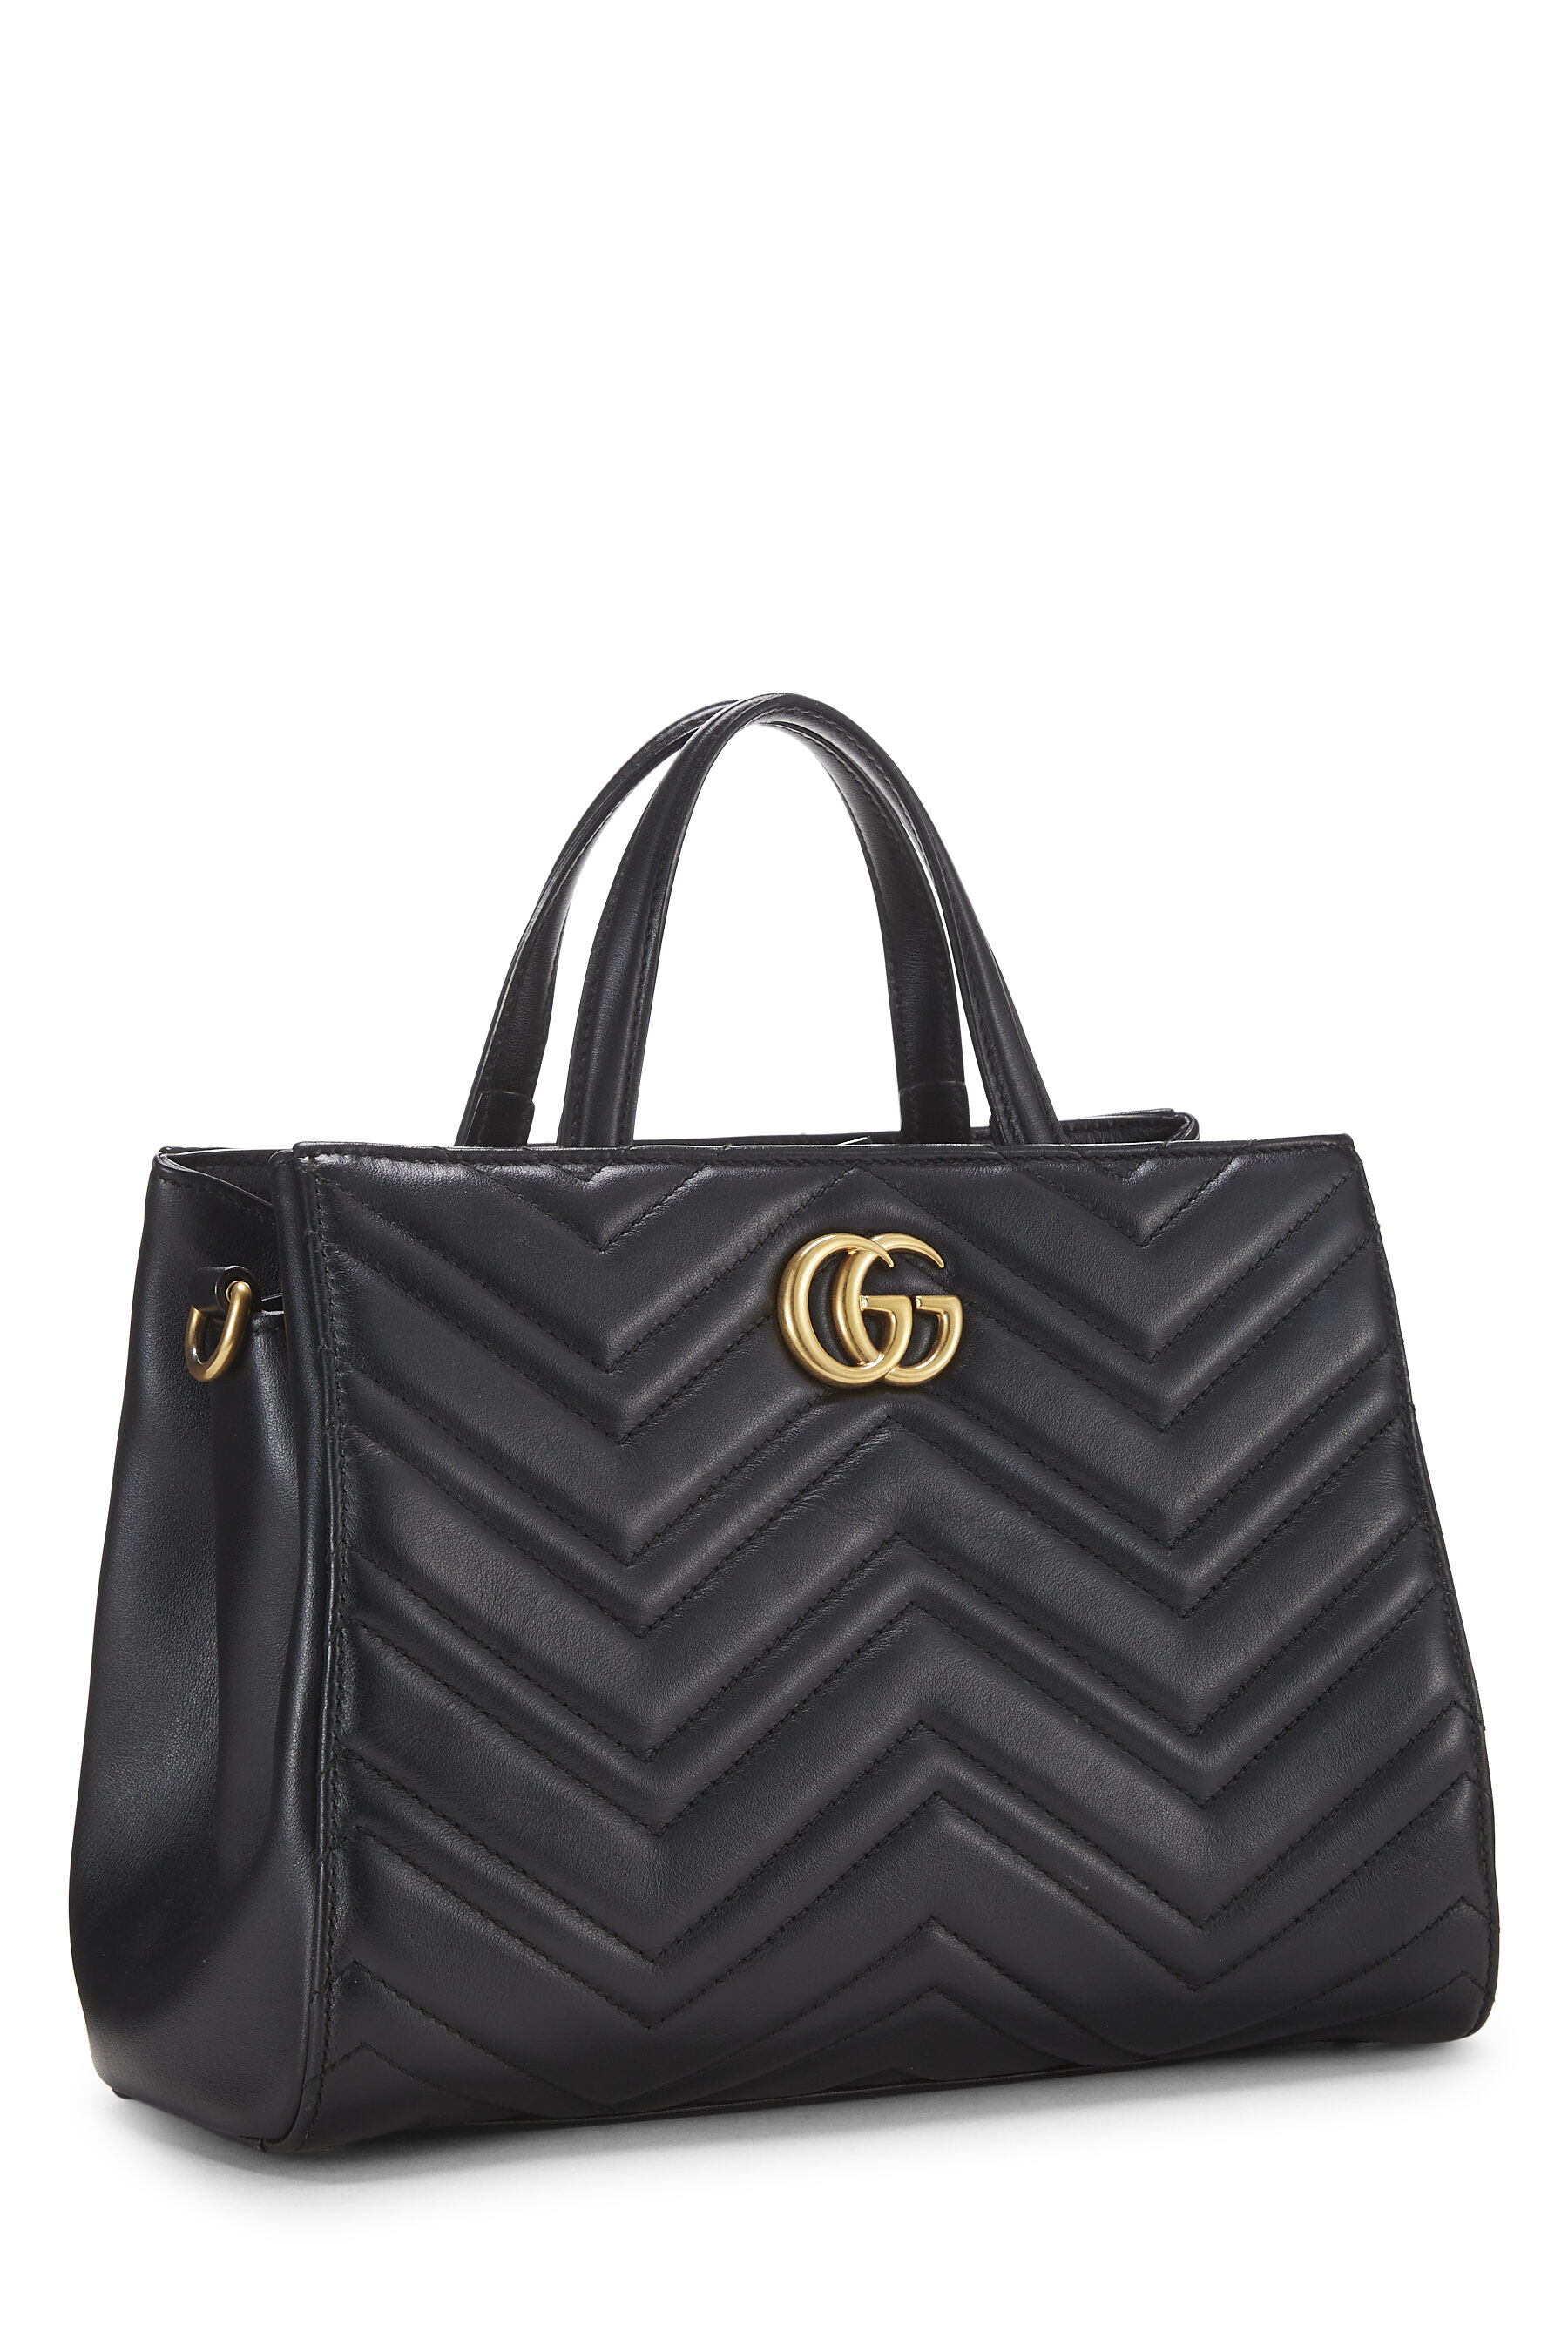 Black Leather GG Marmont Top Handle Bag Small